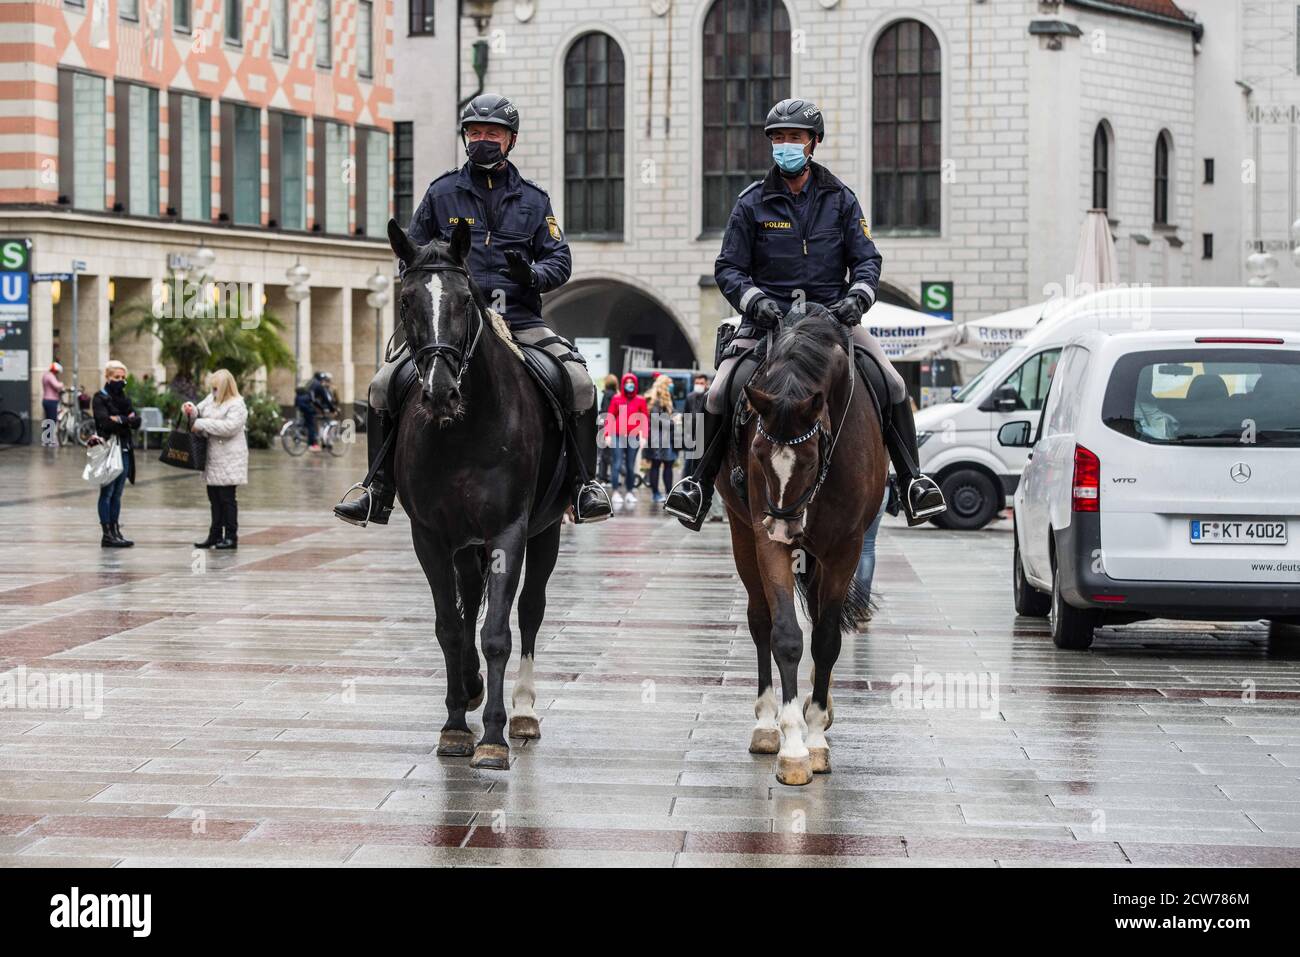 Munich, Bavaria, Germany. 28th Sep, 2020. The Reiterstaffel (mounted units) of the Munich Police patrol Marienplatz and the pedestrian zone during the second wave of the Ccoronavirus crisis. In these zones, masks are mandatory. Credit: Sachelle Babbar/ZUMA Wire/Alamy Live News Stock Photo